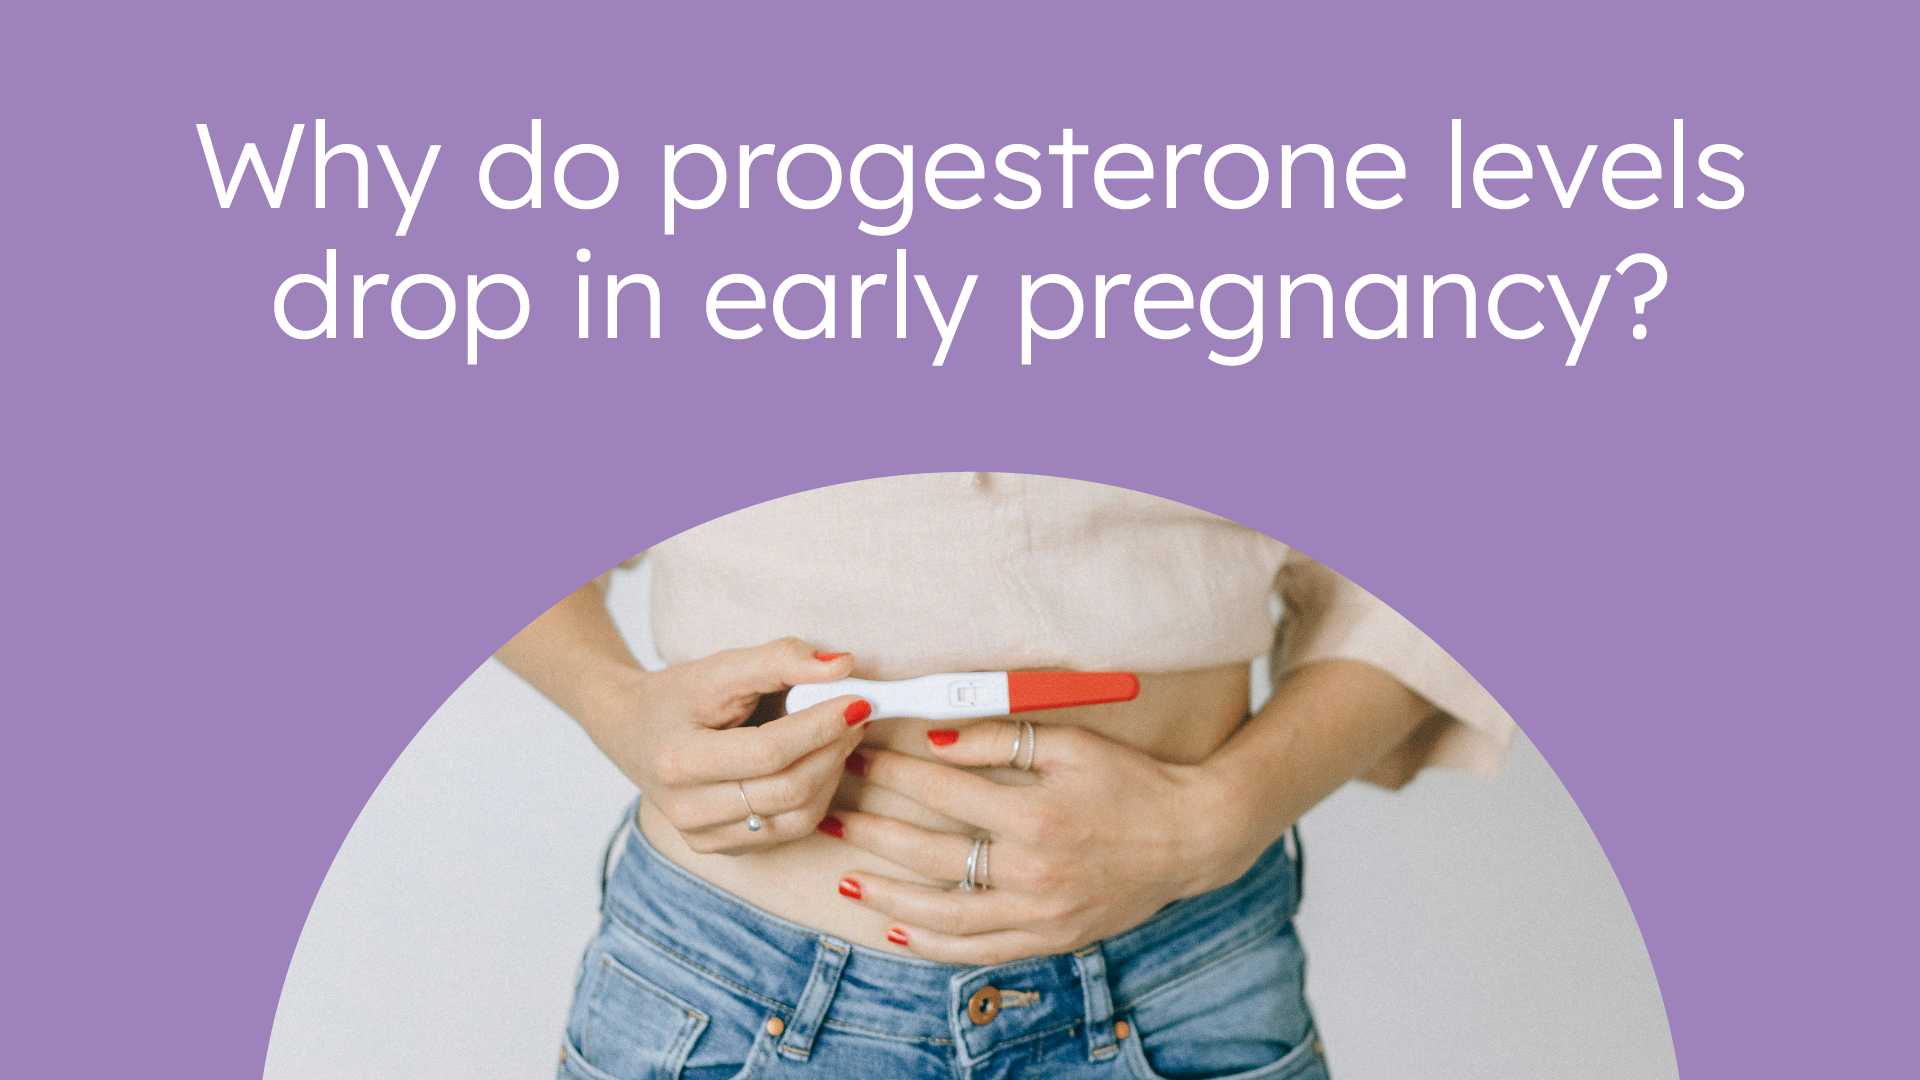 Why do progesterone levels drop in early pregnancy?